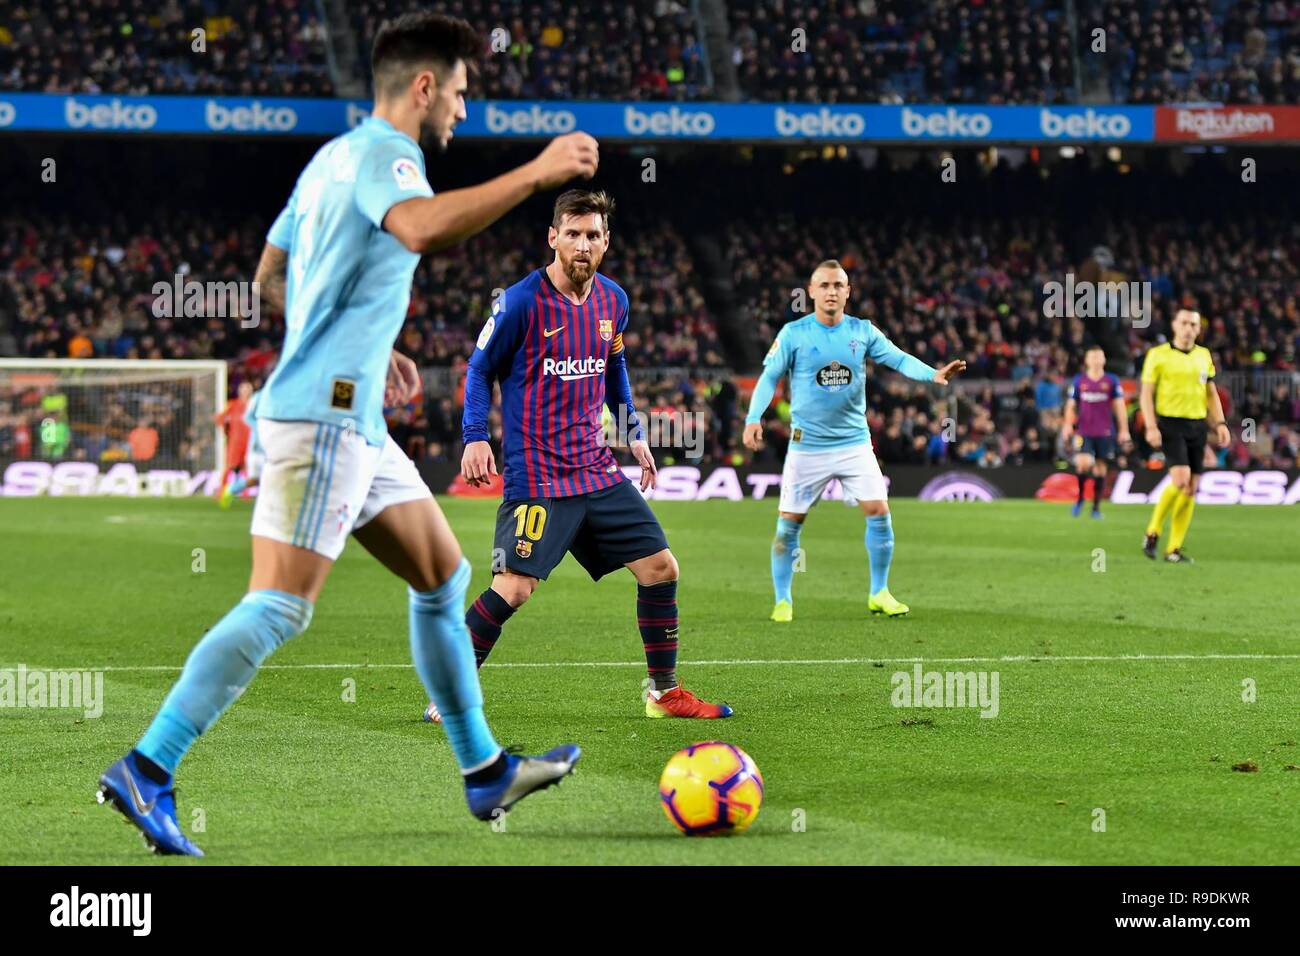 Barcelona, Spain. 22nd Dec 2018. Messi of FC Barcelona in action during the spanish league, football match between FC Barcelona and Celta de Vigo on December 22, 2018 at Camp Nou stadium in Barcelona, Spain  Cordon Press Credit: CORDON PRESS/Alamy Live News Stock Photo